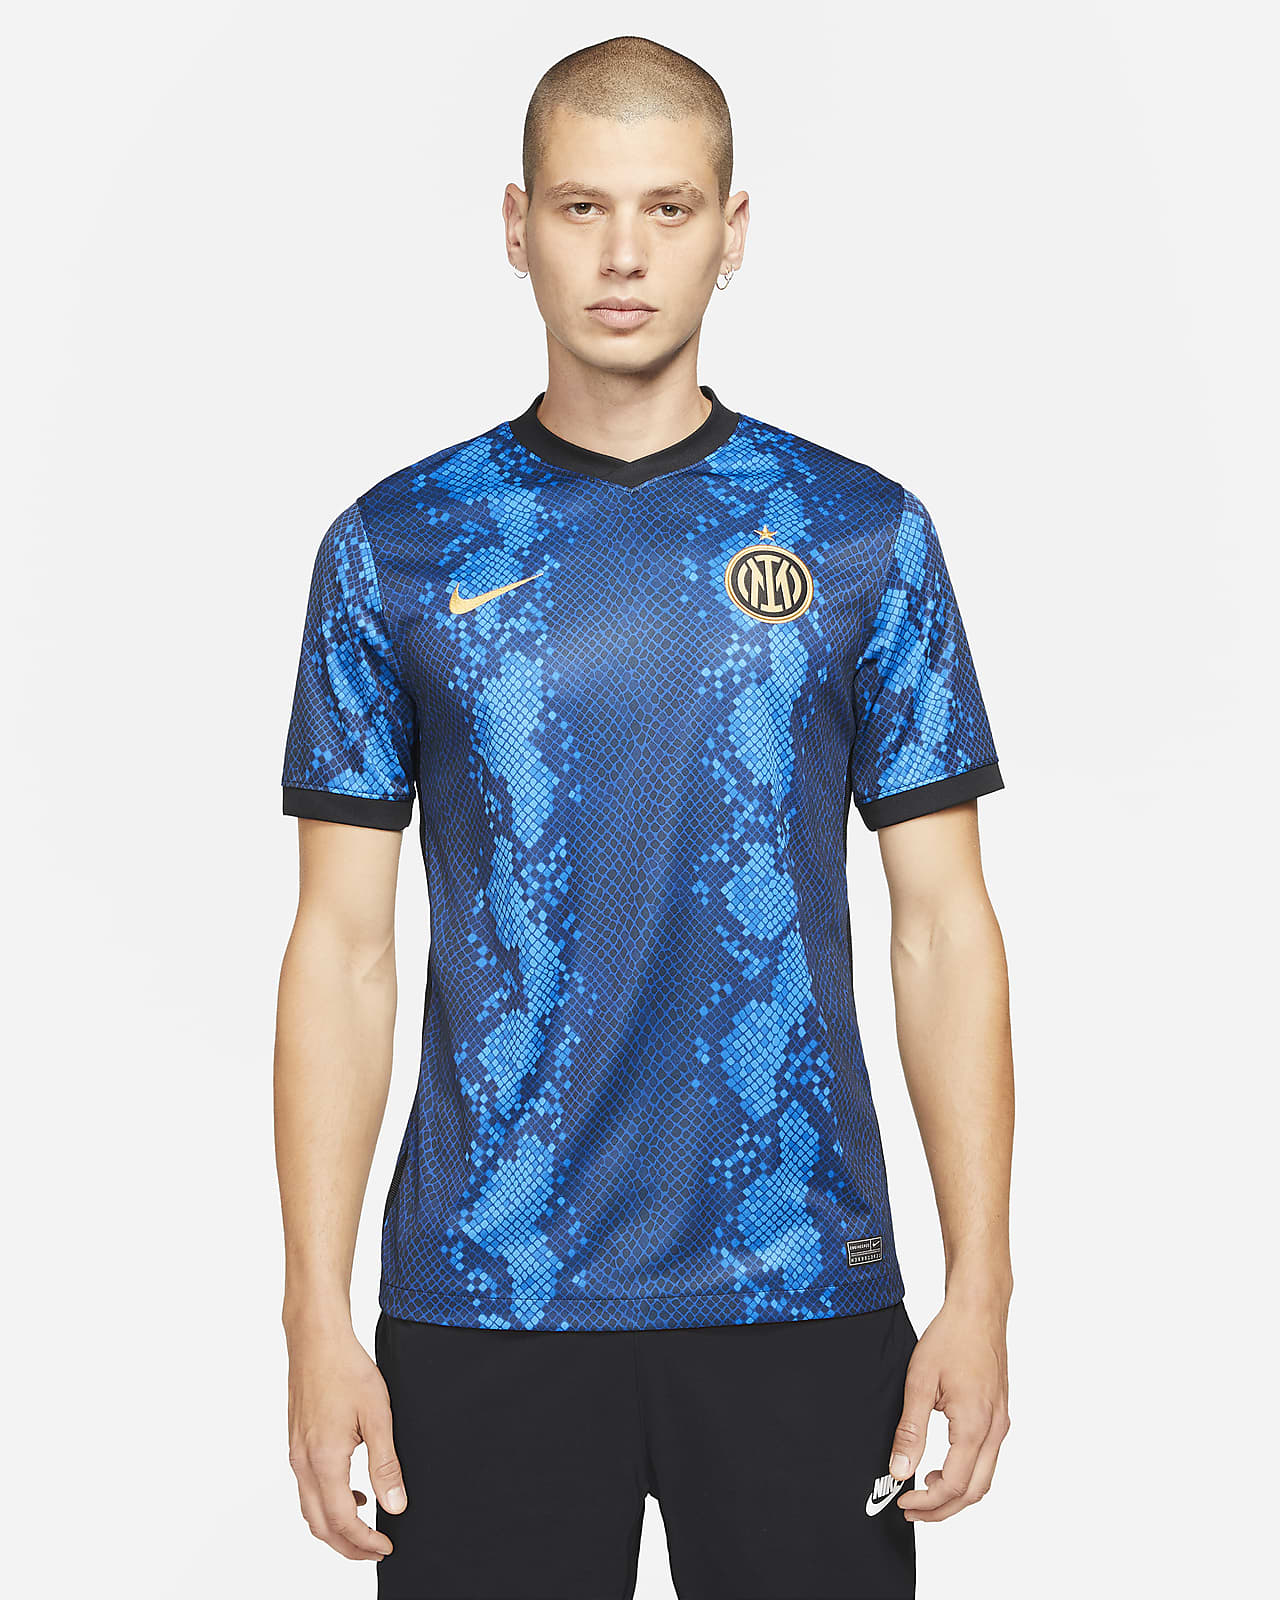 maillot entrainement inter milan 2021